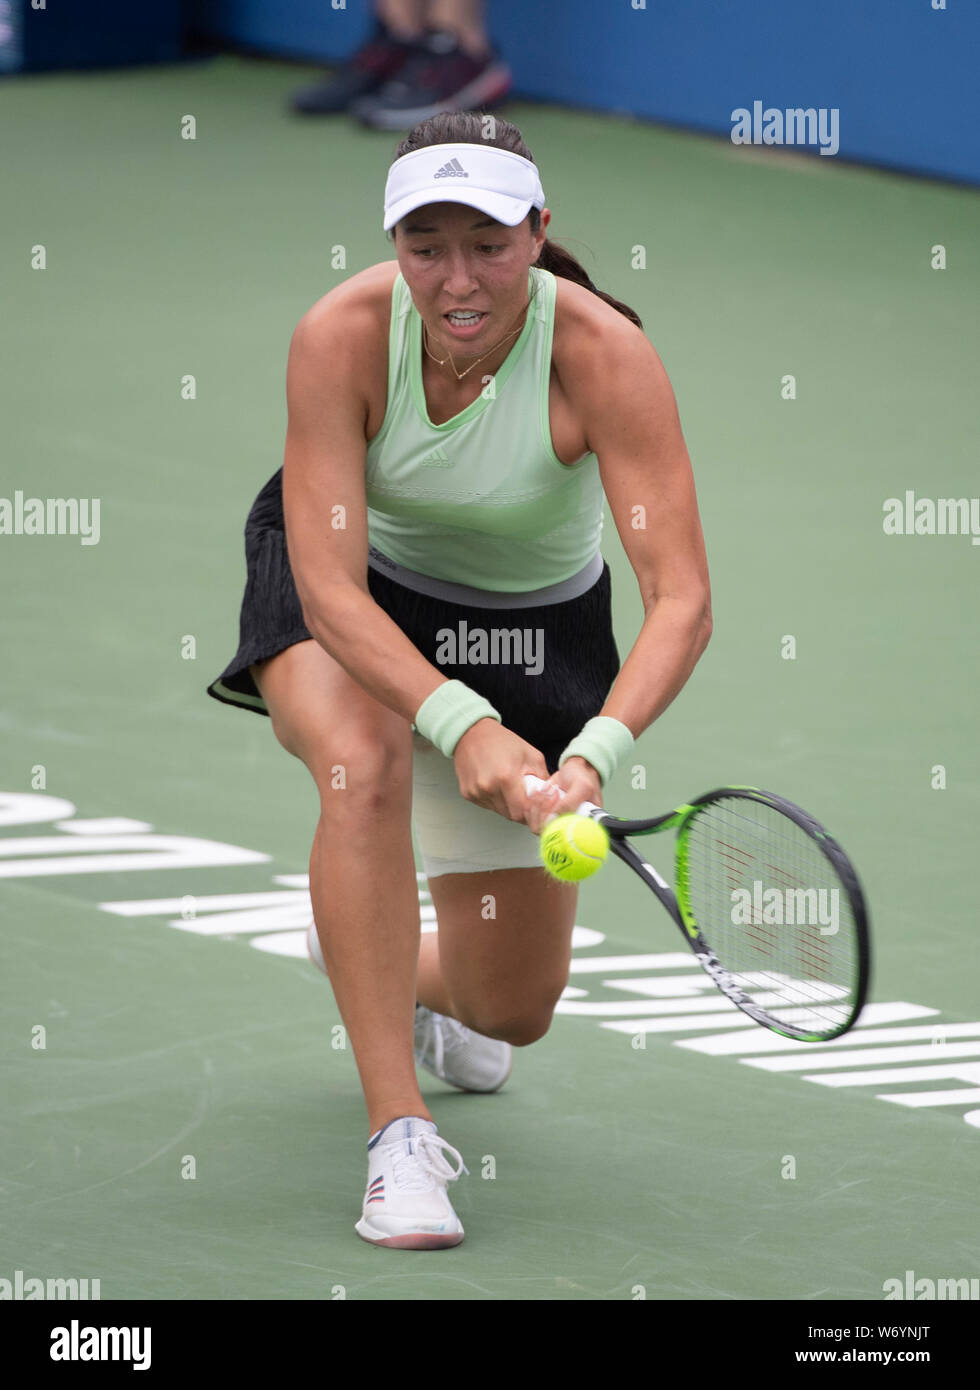 August 3, 2019 Jessica Pegula (USA) defeated Anna Kalinskaya (RUS) 6-3, 3-6, 6-1, at the CitiOpen being played at Rock Creek Park Tennis Center in Washington, DC, 